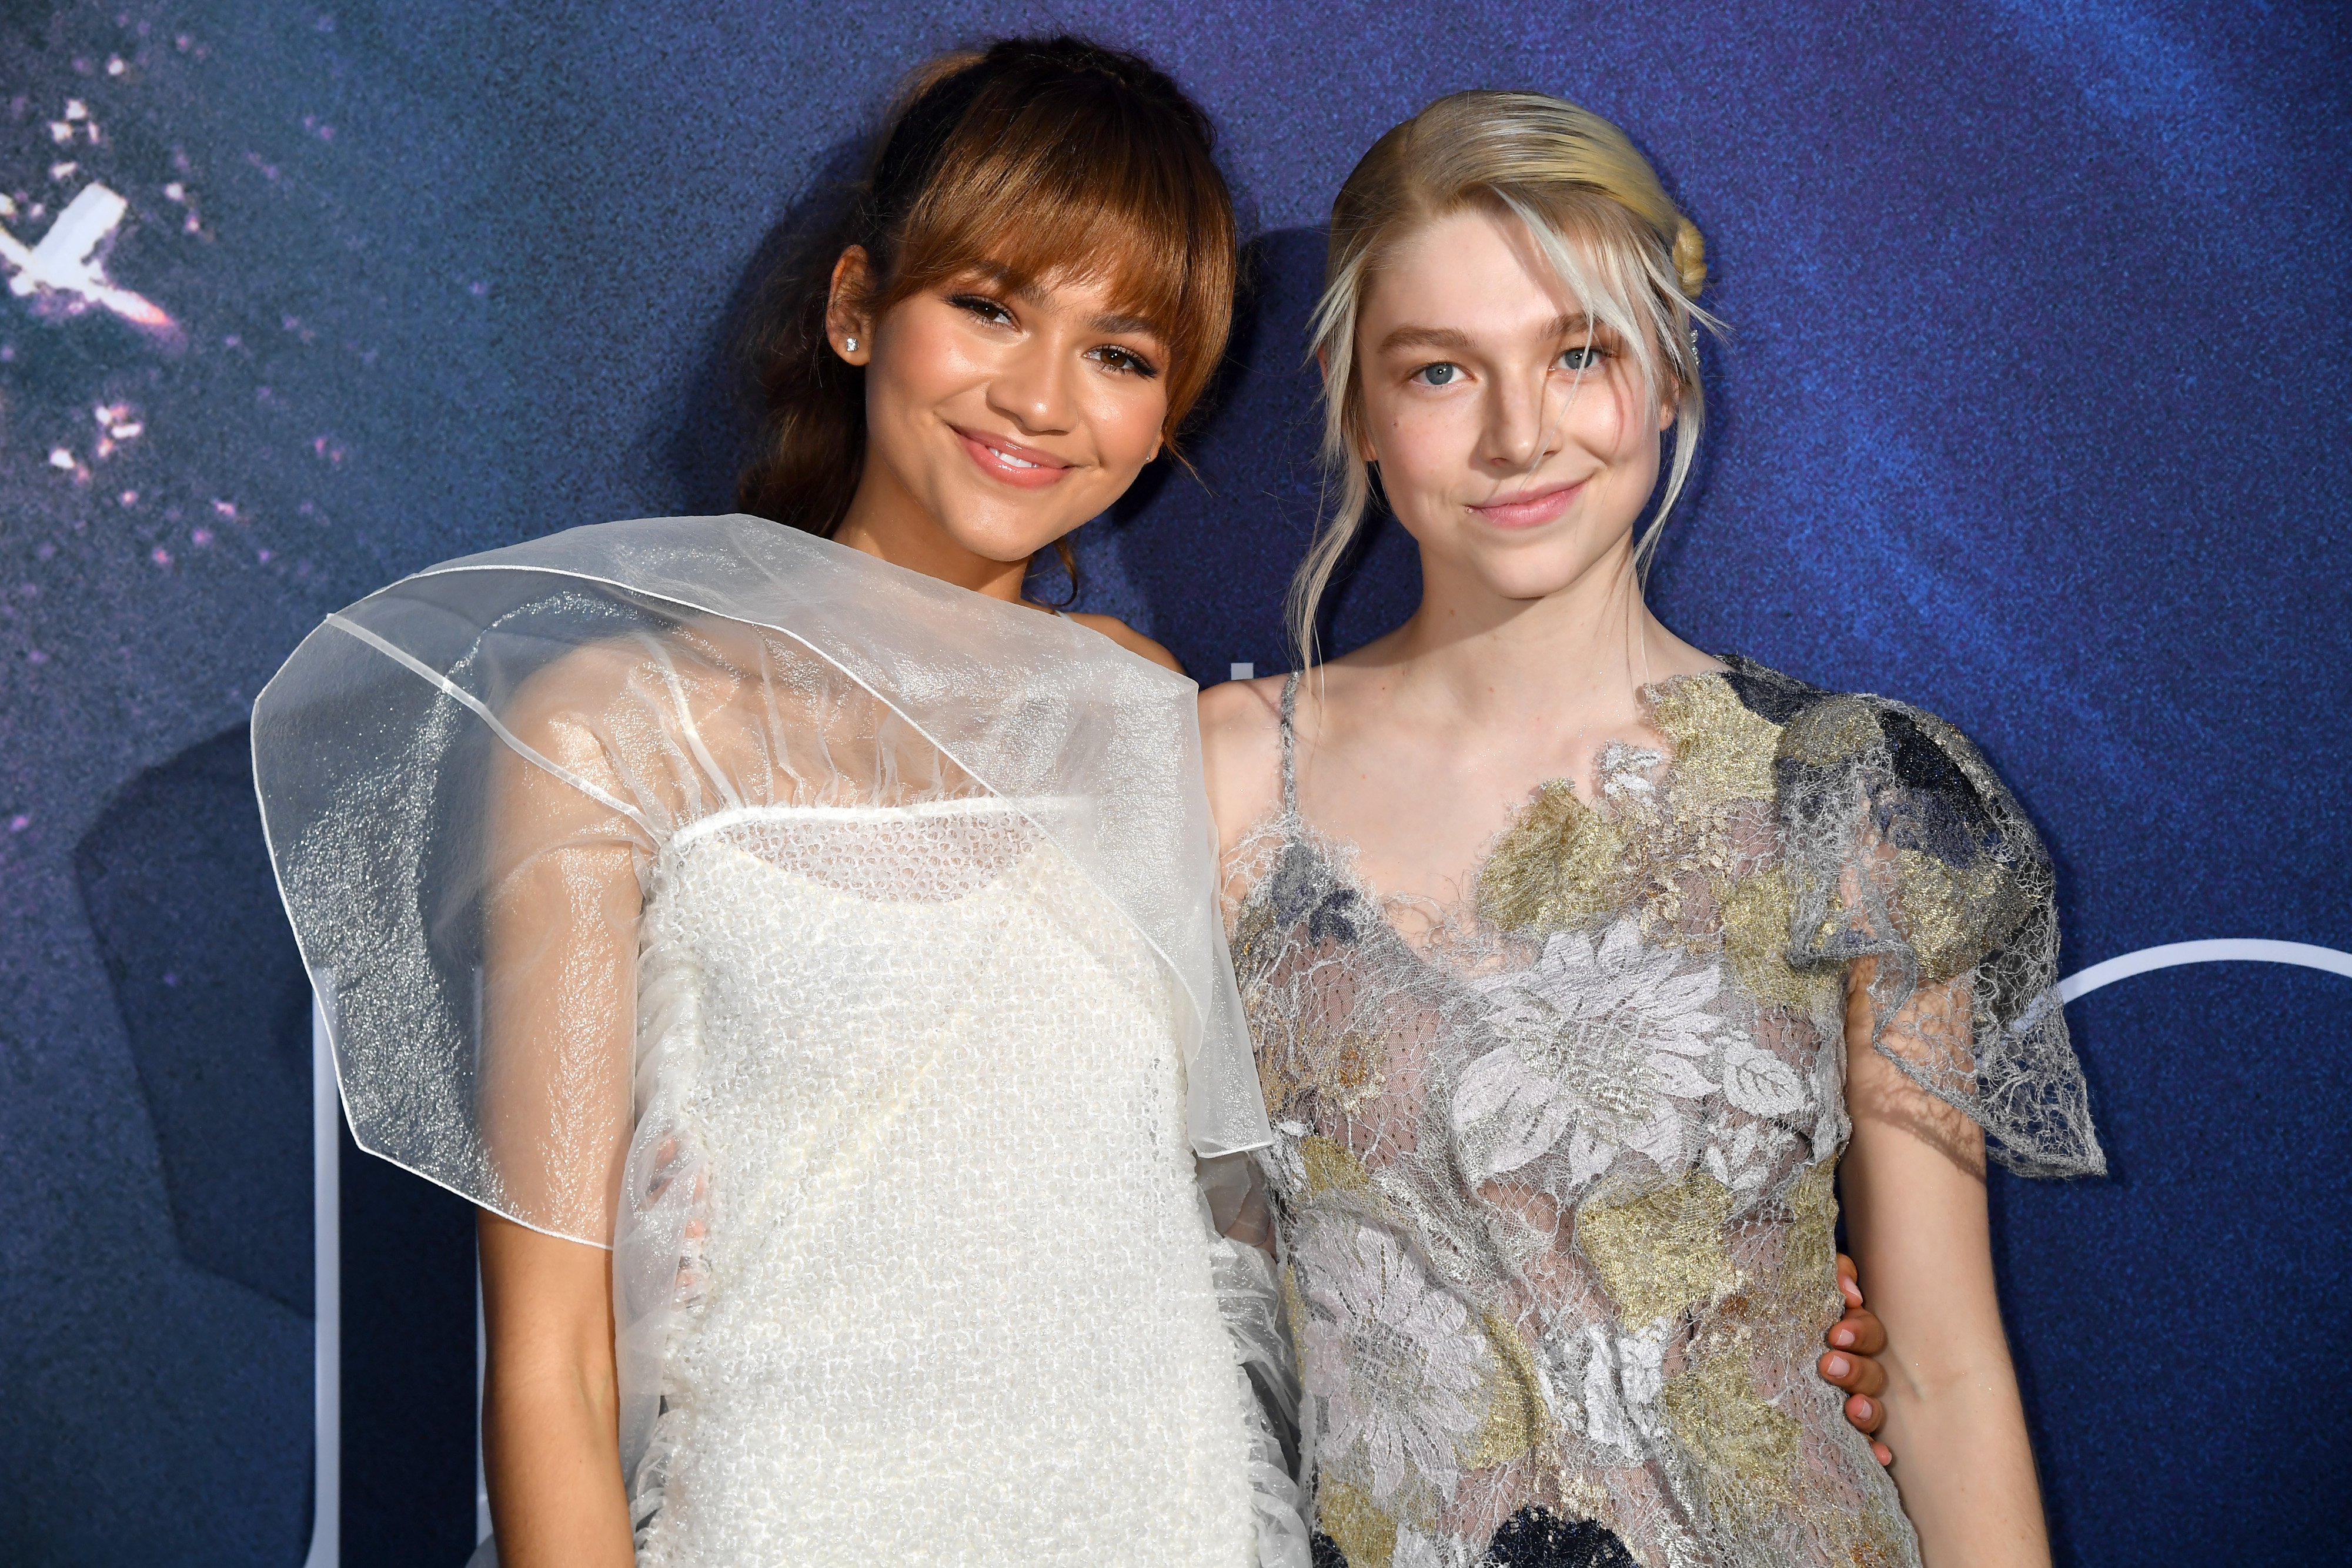 Zendaya and Hunter Schafer attend HBO's "Euphoria" premiere at the Arclight Pacific Theatres' Cinerama Dome on June 04, 2019 in Los Angeles, California | Jeff Kravitz/FilmMagic for HBO